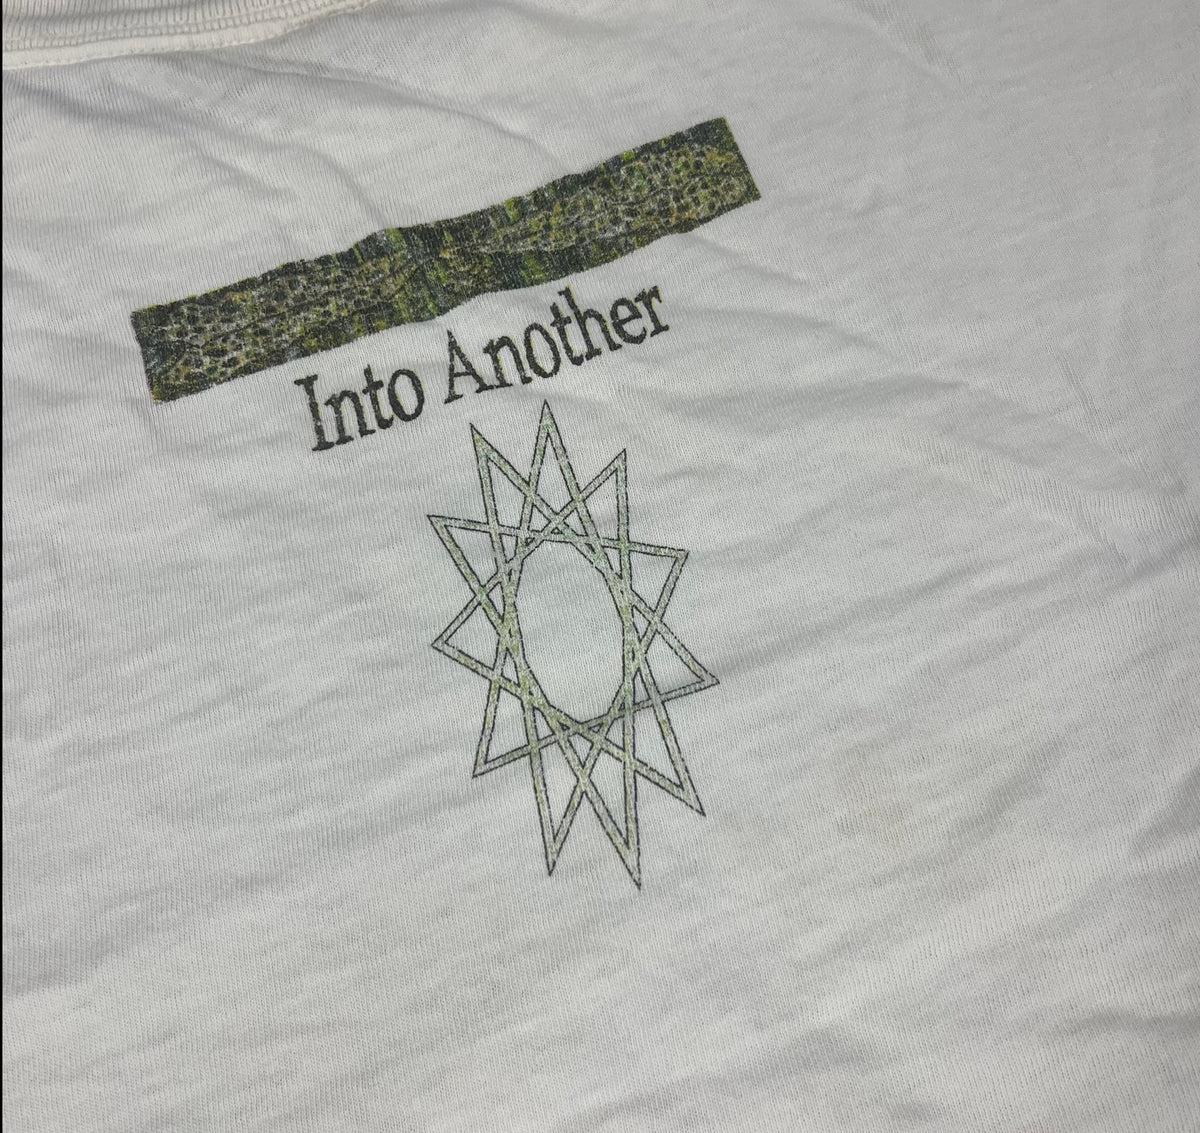 Vintage Into Another &quot;Ignaurus&quot; Promotional T-Shirt